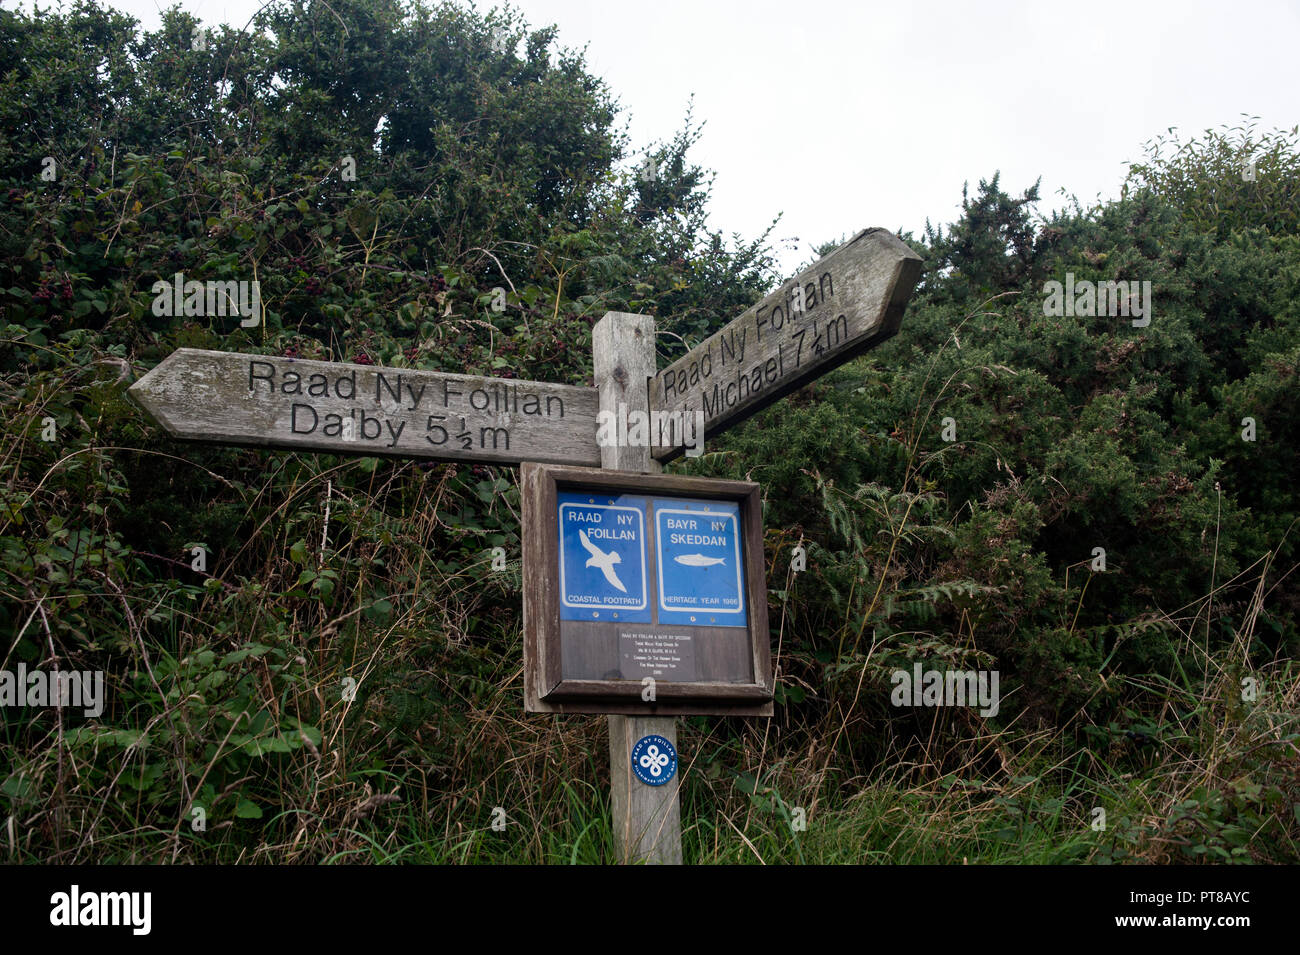 Signage indicating directions to Daley and St. Michael, Isle of Man Stock Photo